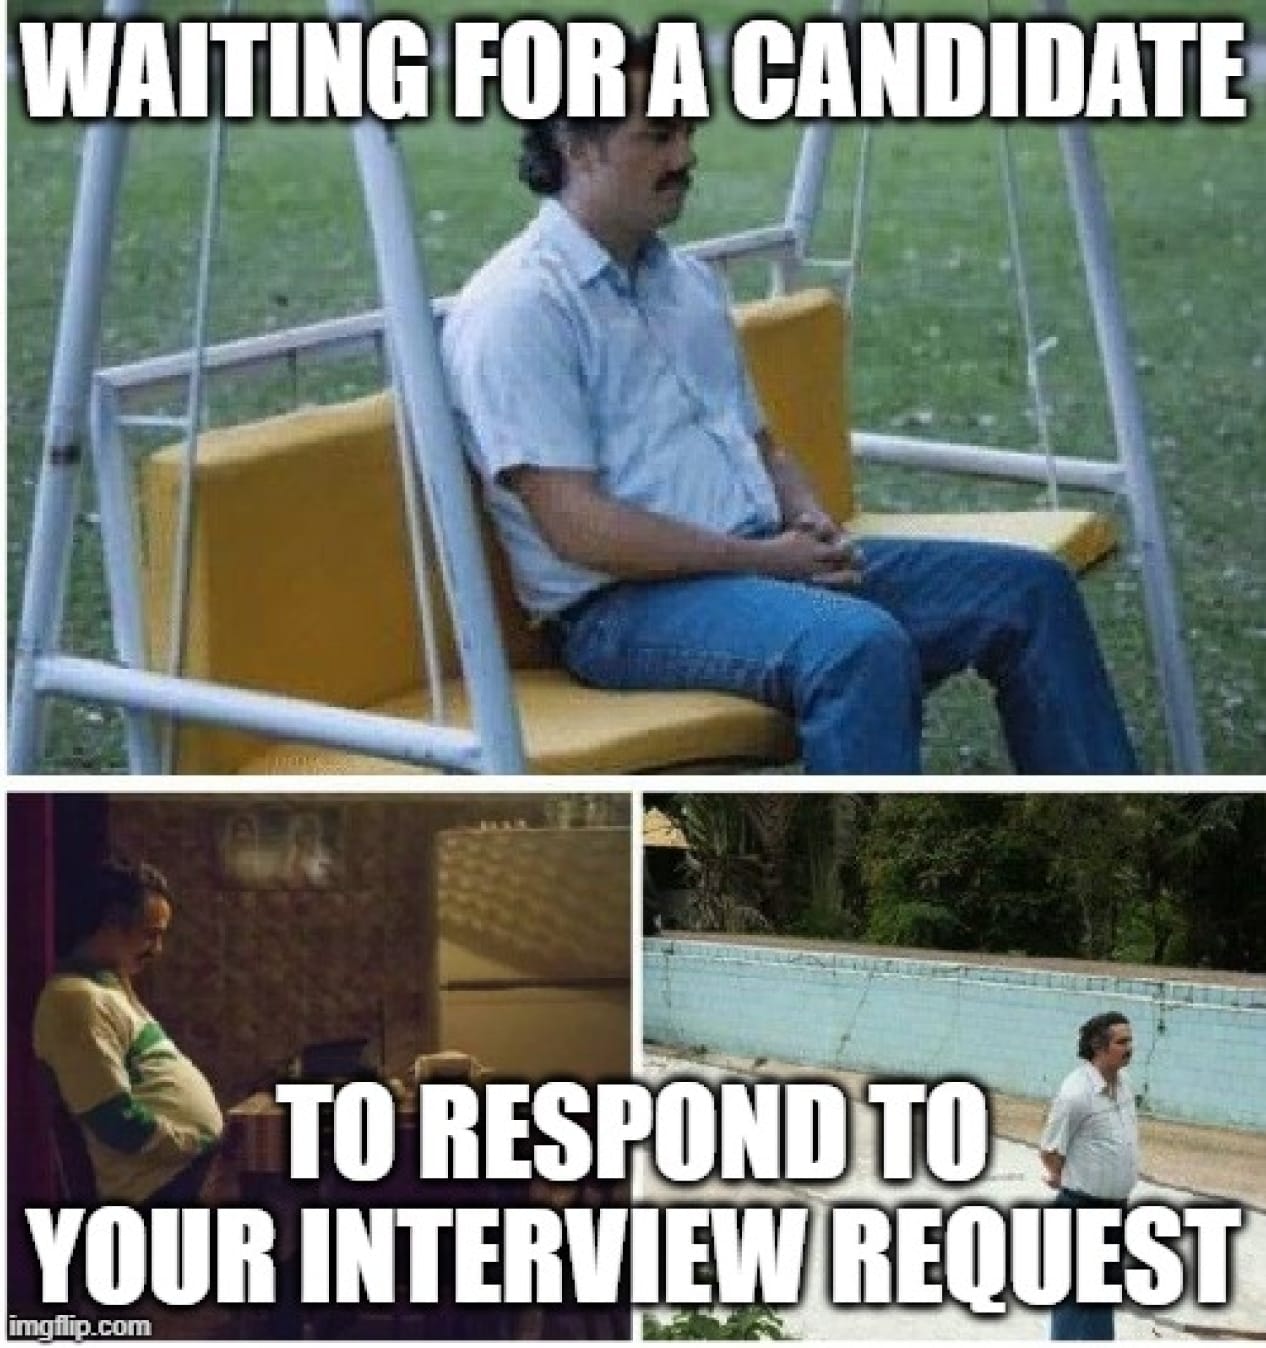 25+ Hilarious Recruiting Memes That Will Leave You ROFL